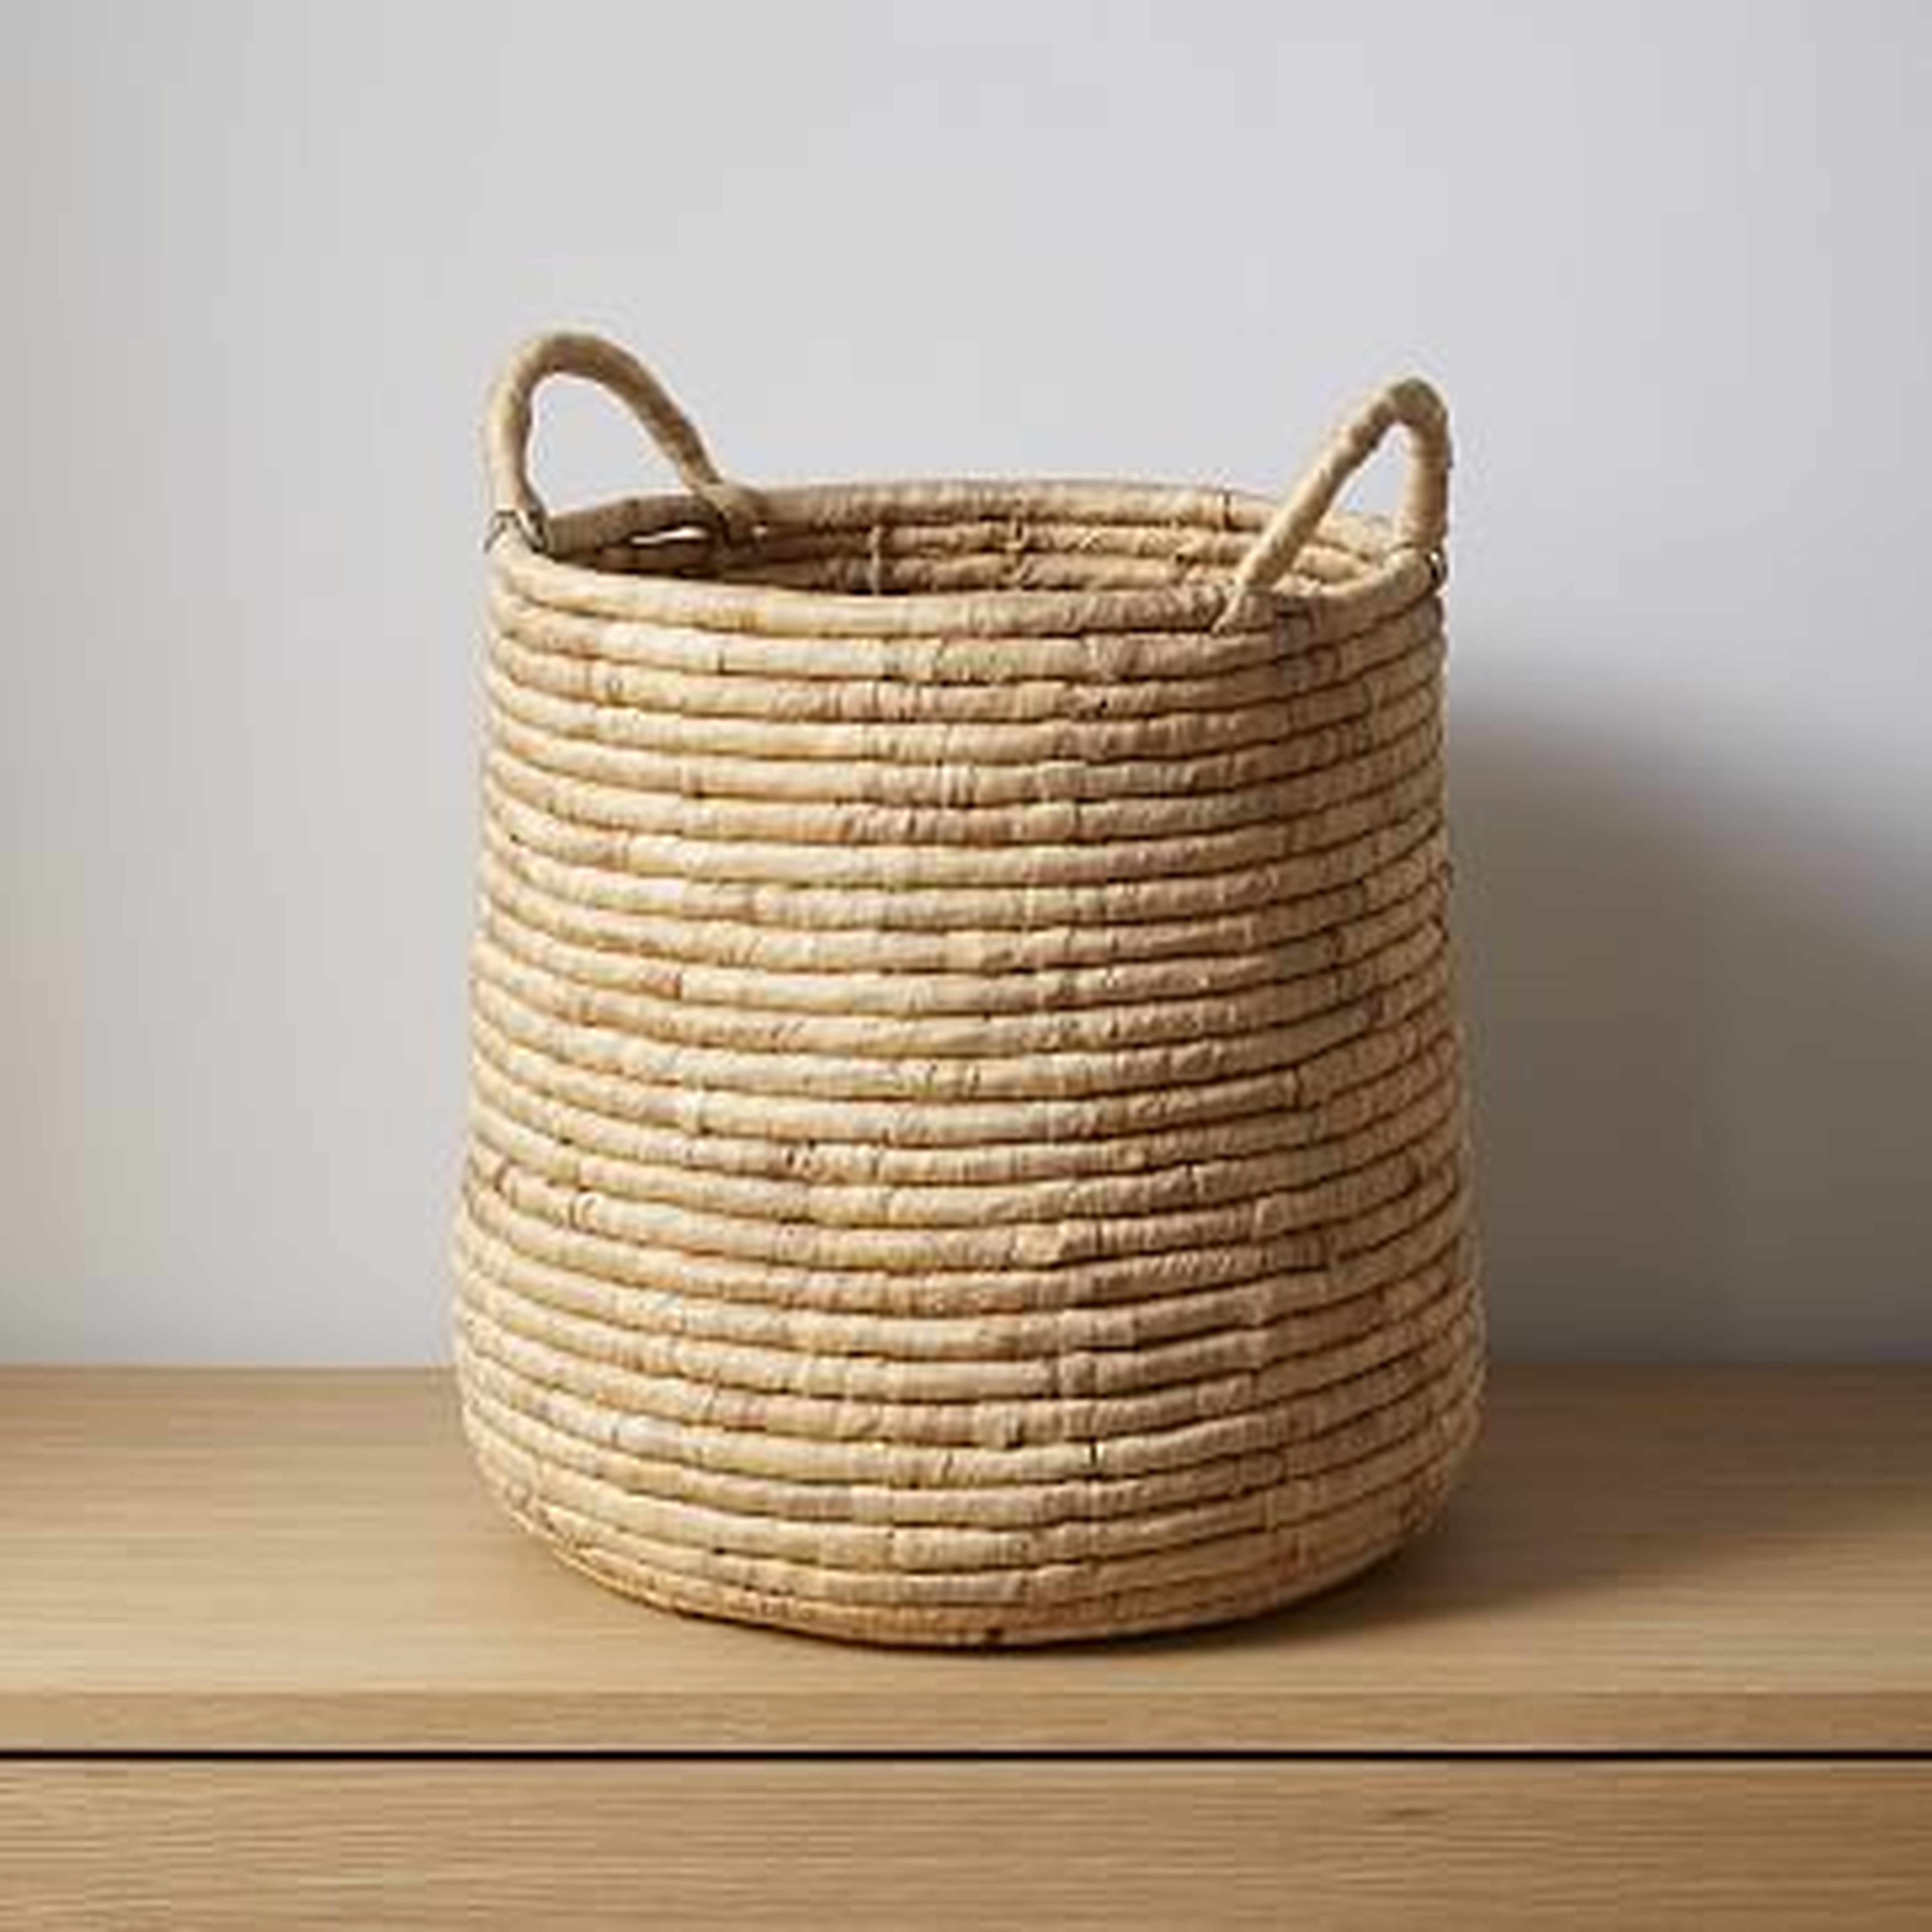 Woven Seagrass, Round Handle, Baskets, Natural, Tall, 16.1"D x 15.7"H - West Elm